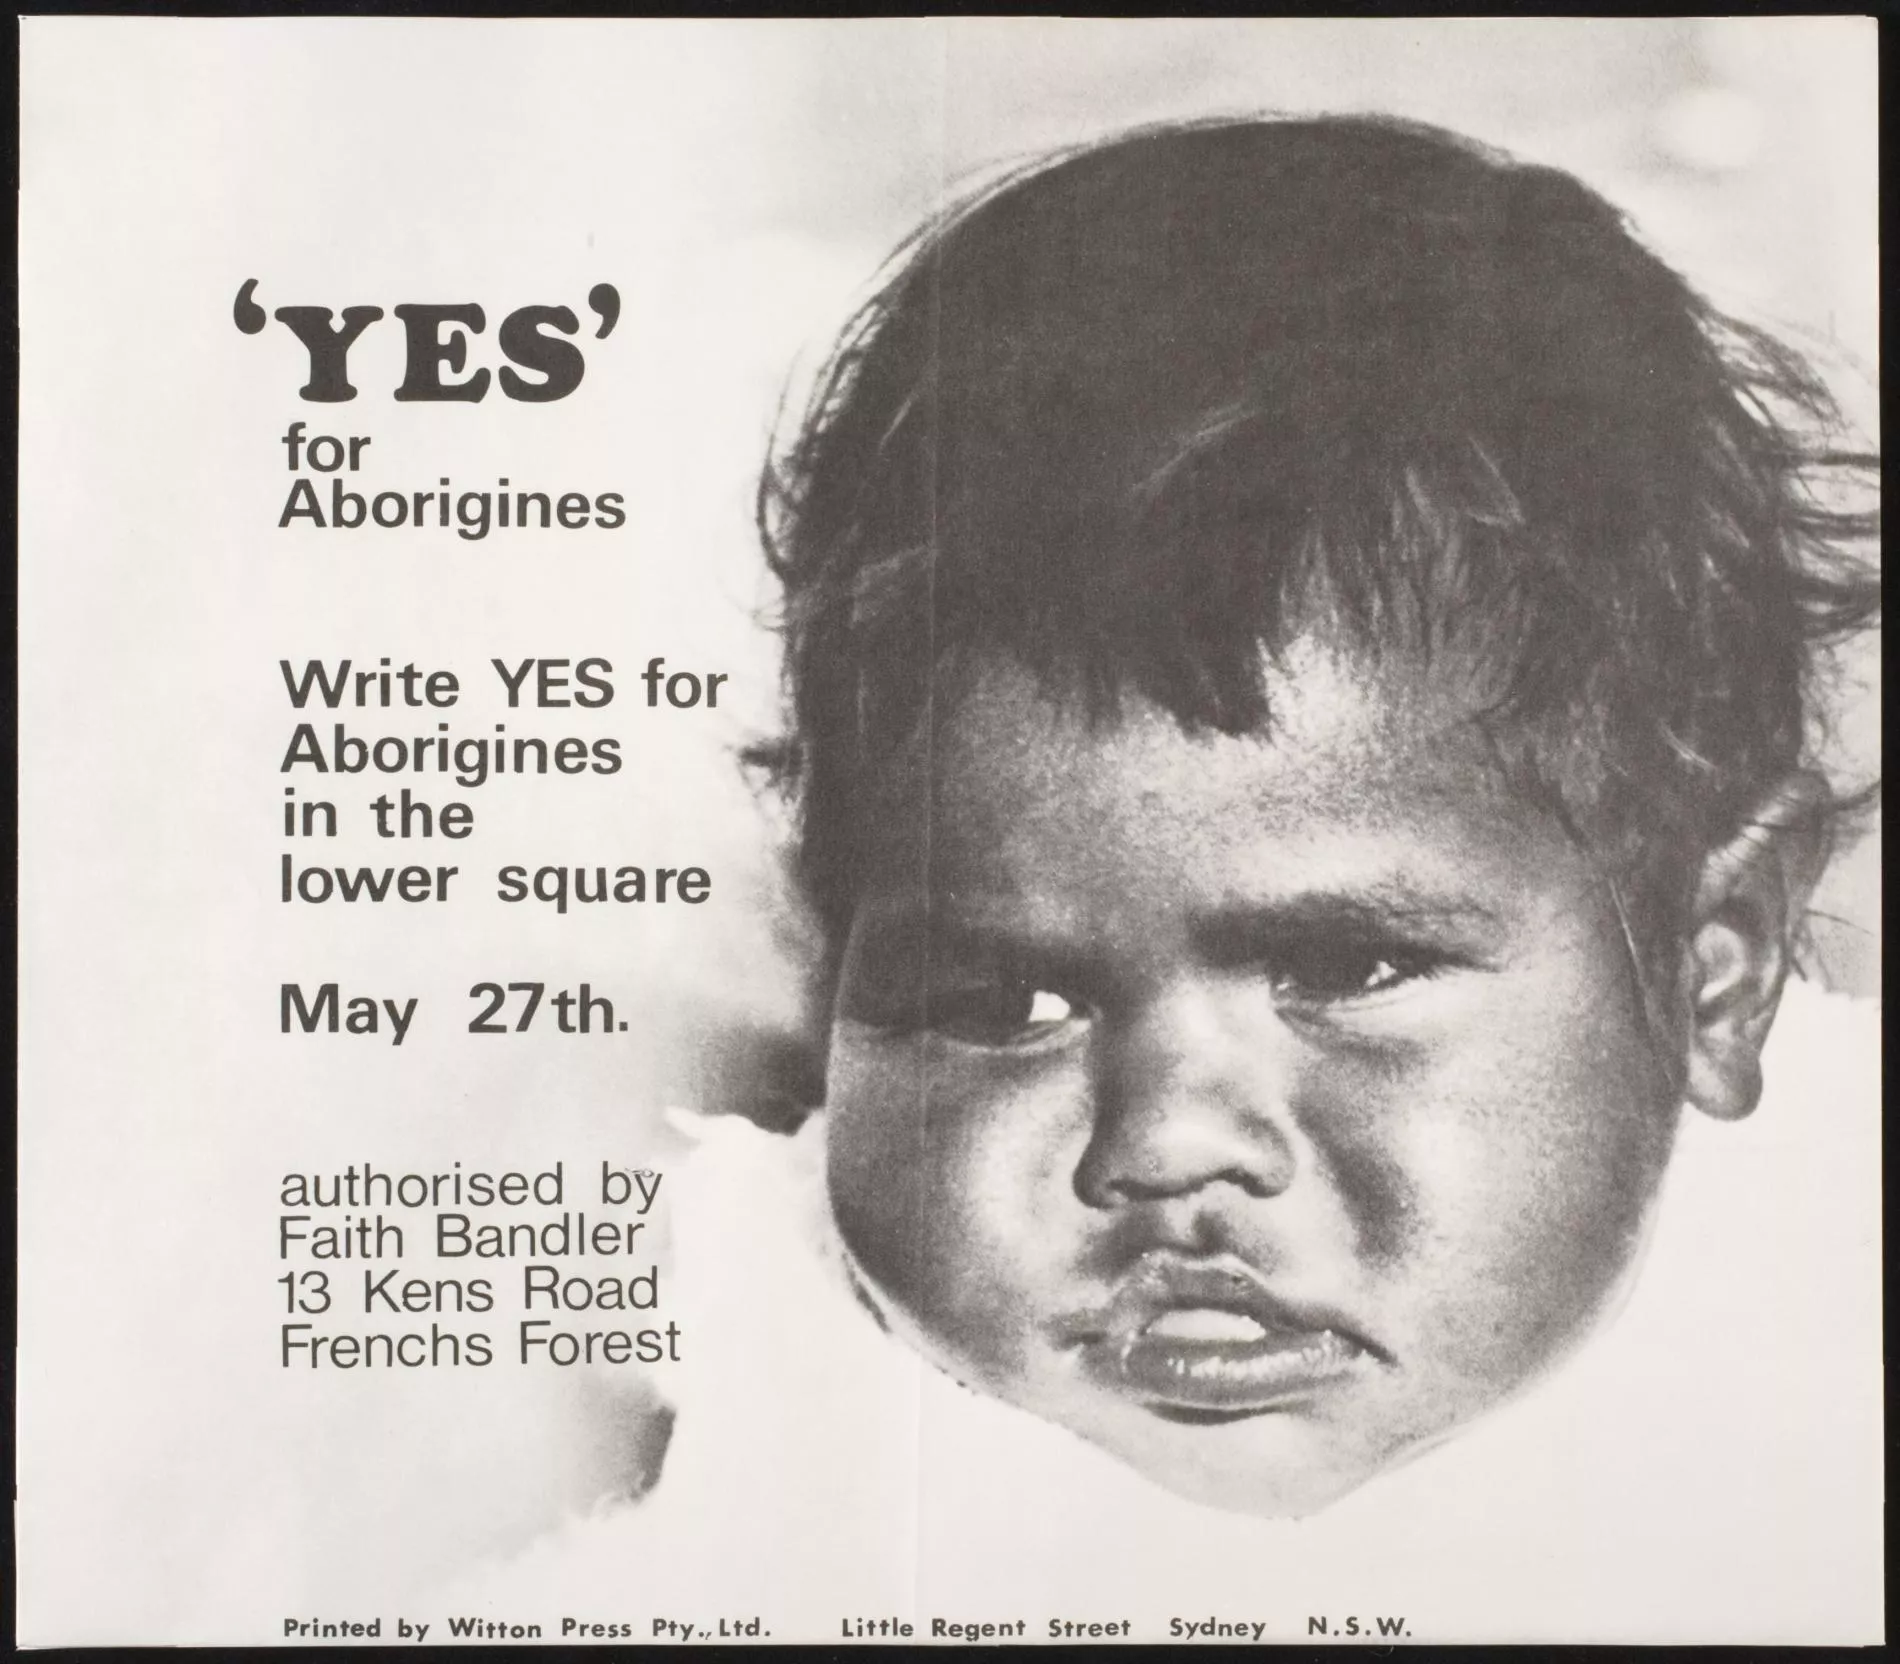 A ‘Yes’ campaign poster from the referendum features a young First Nations girl, Janelle Marshall, and authorisation from activist Faith Bandler, 1967